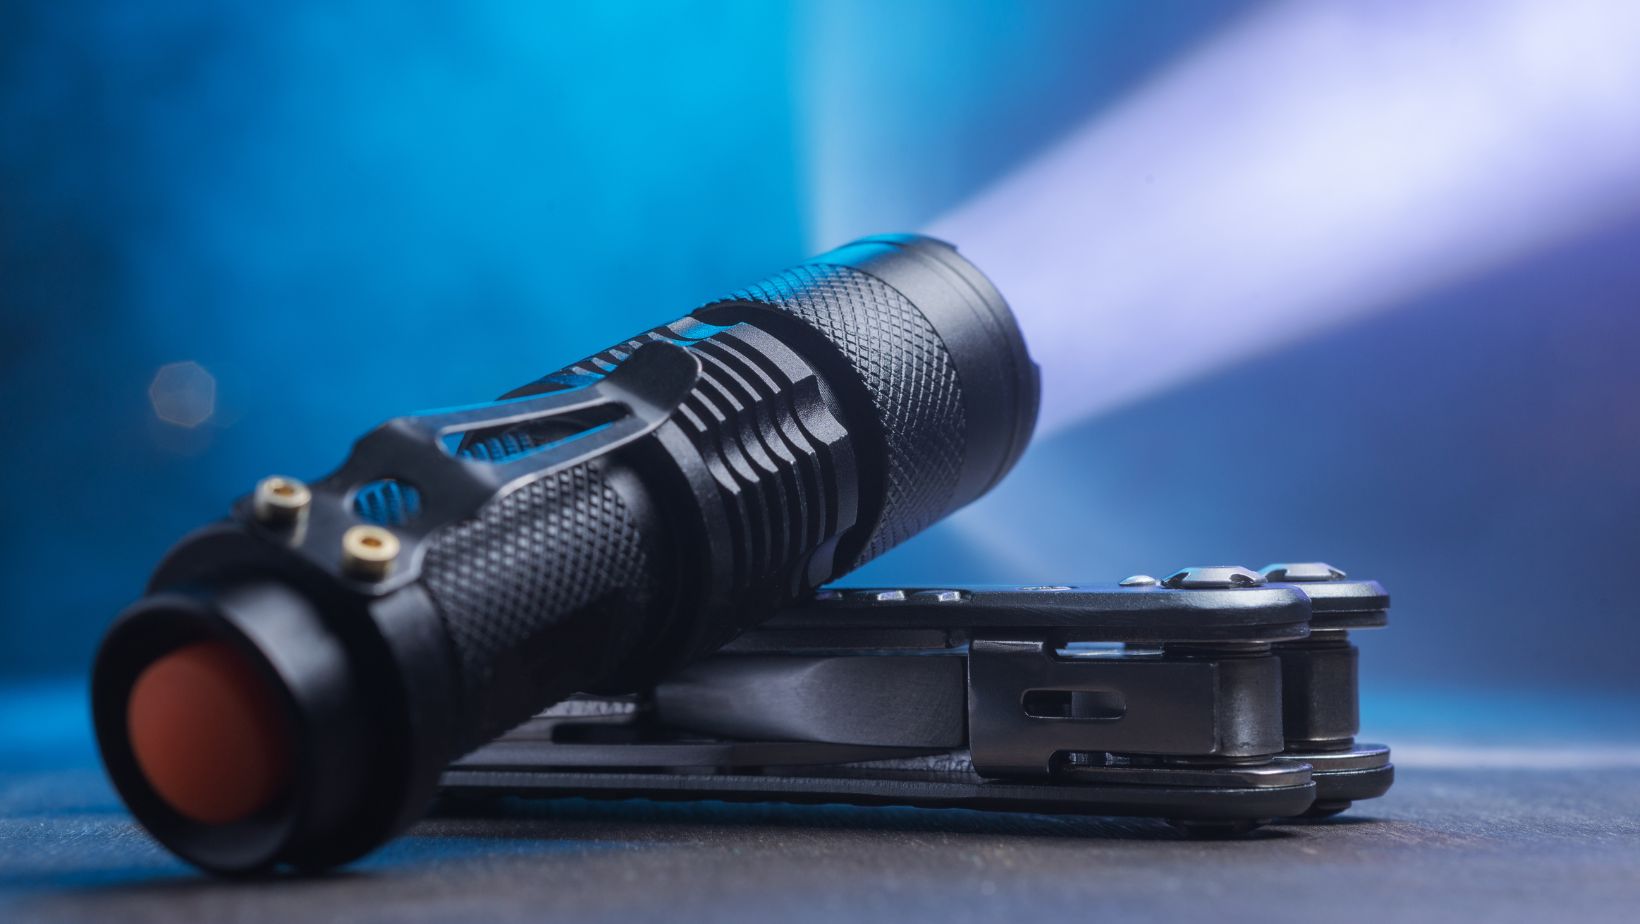 Are Tactical Flashlights Good For Self-Defense?